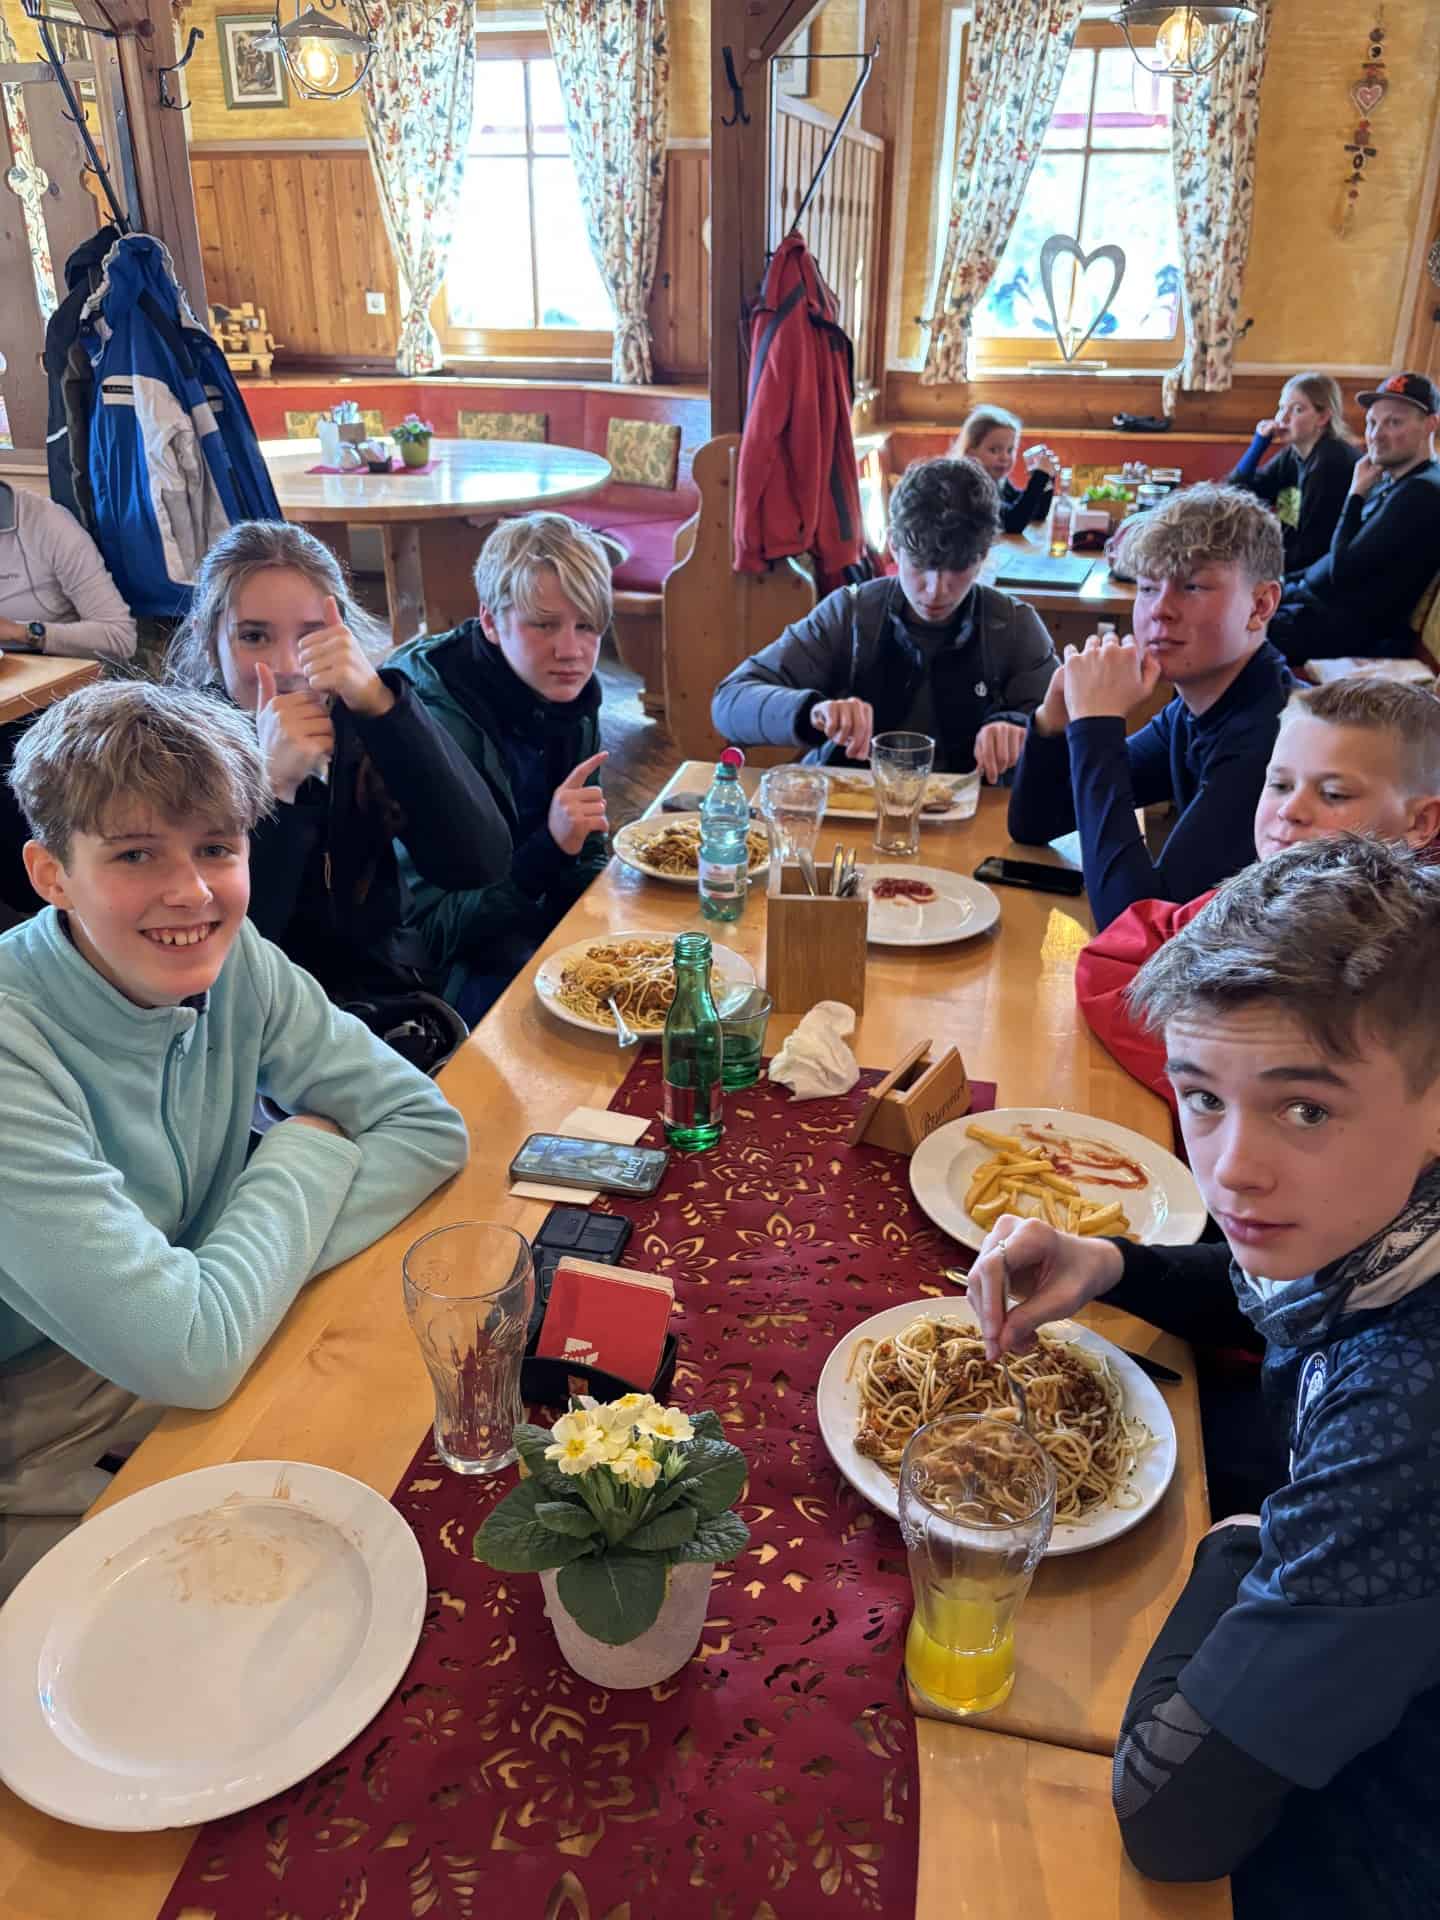 Students from Priestnall School have a meal at a restaurant in Austria.